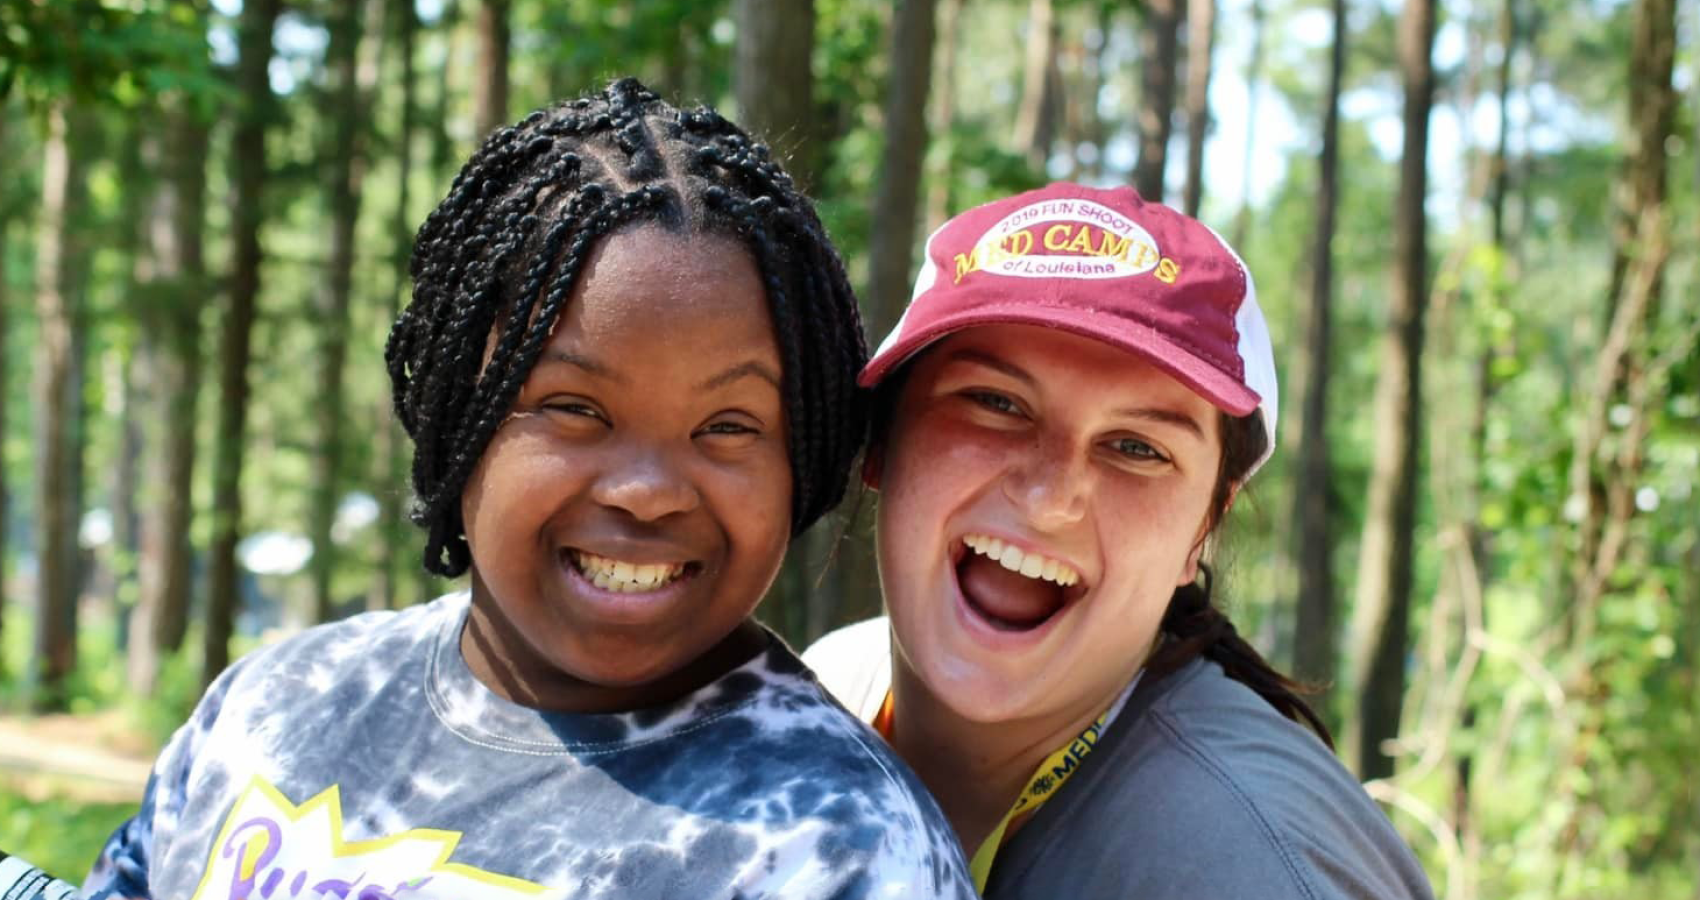 Counselor and Camper Smiling